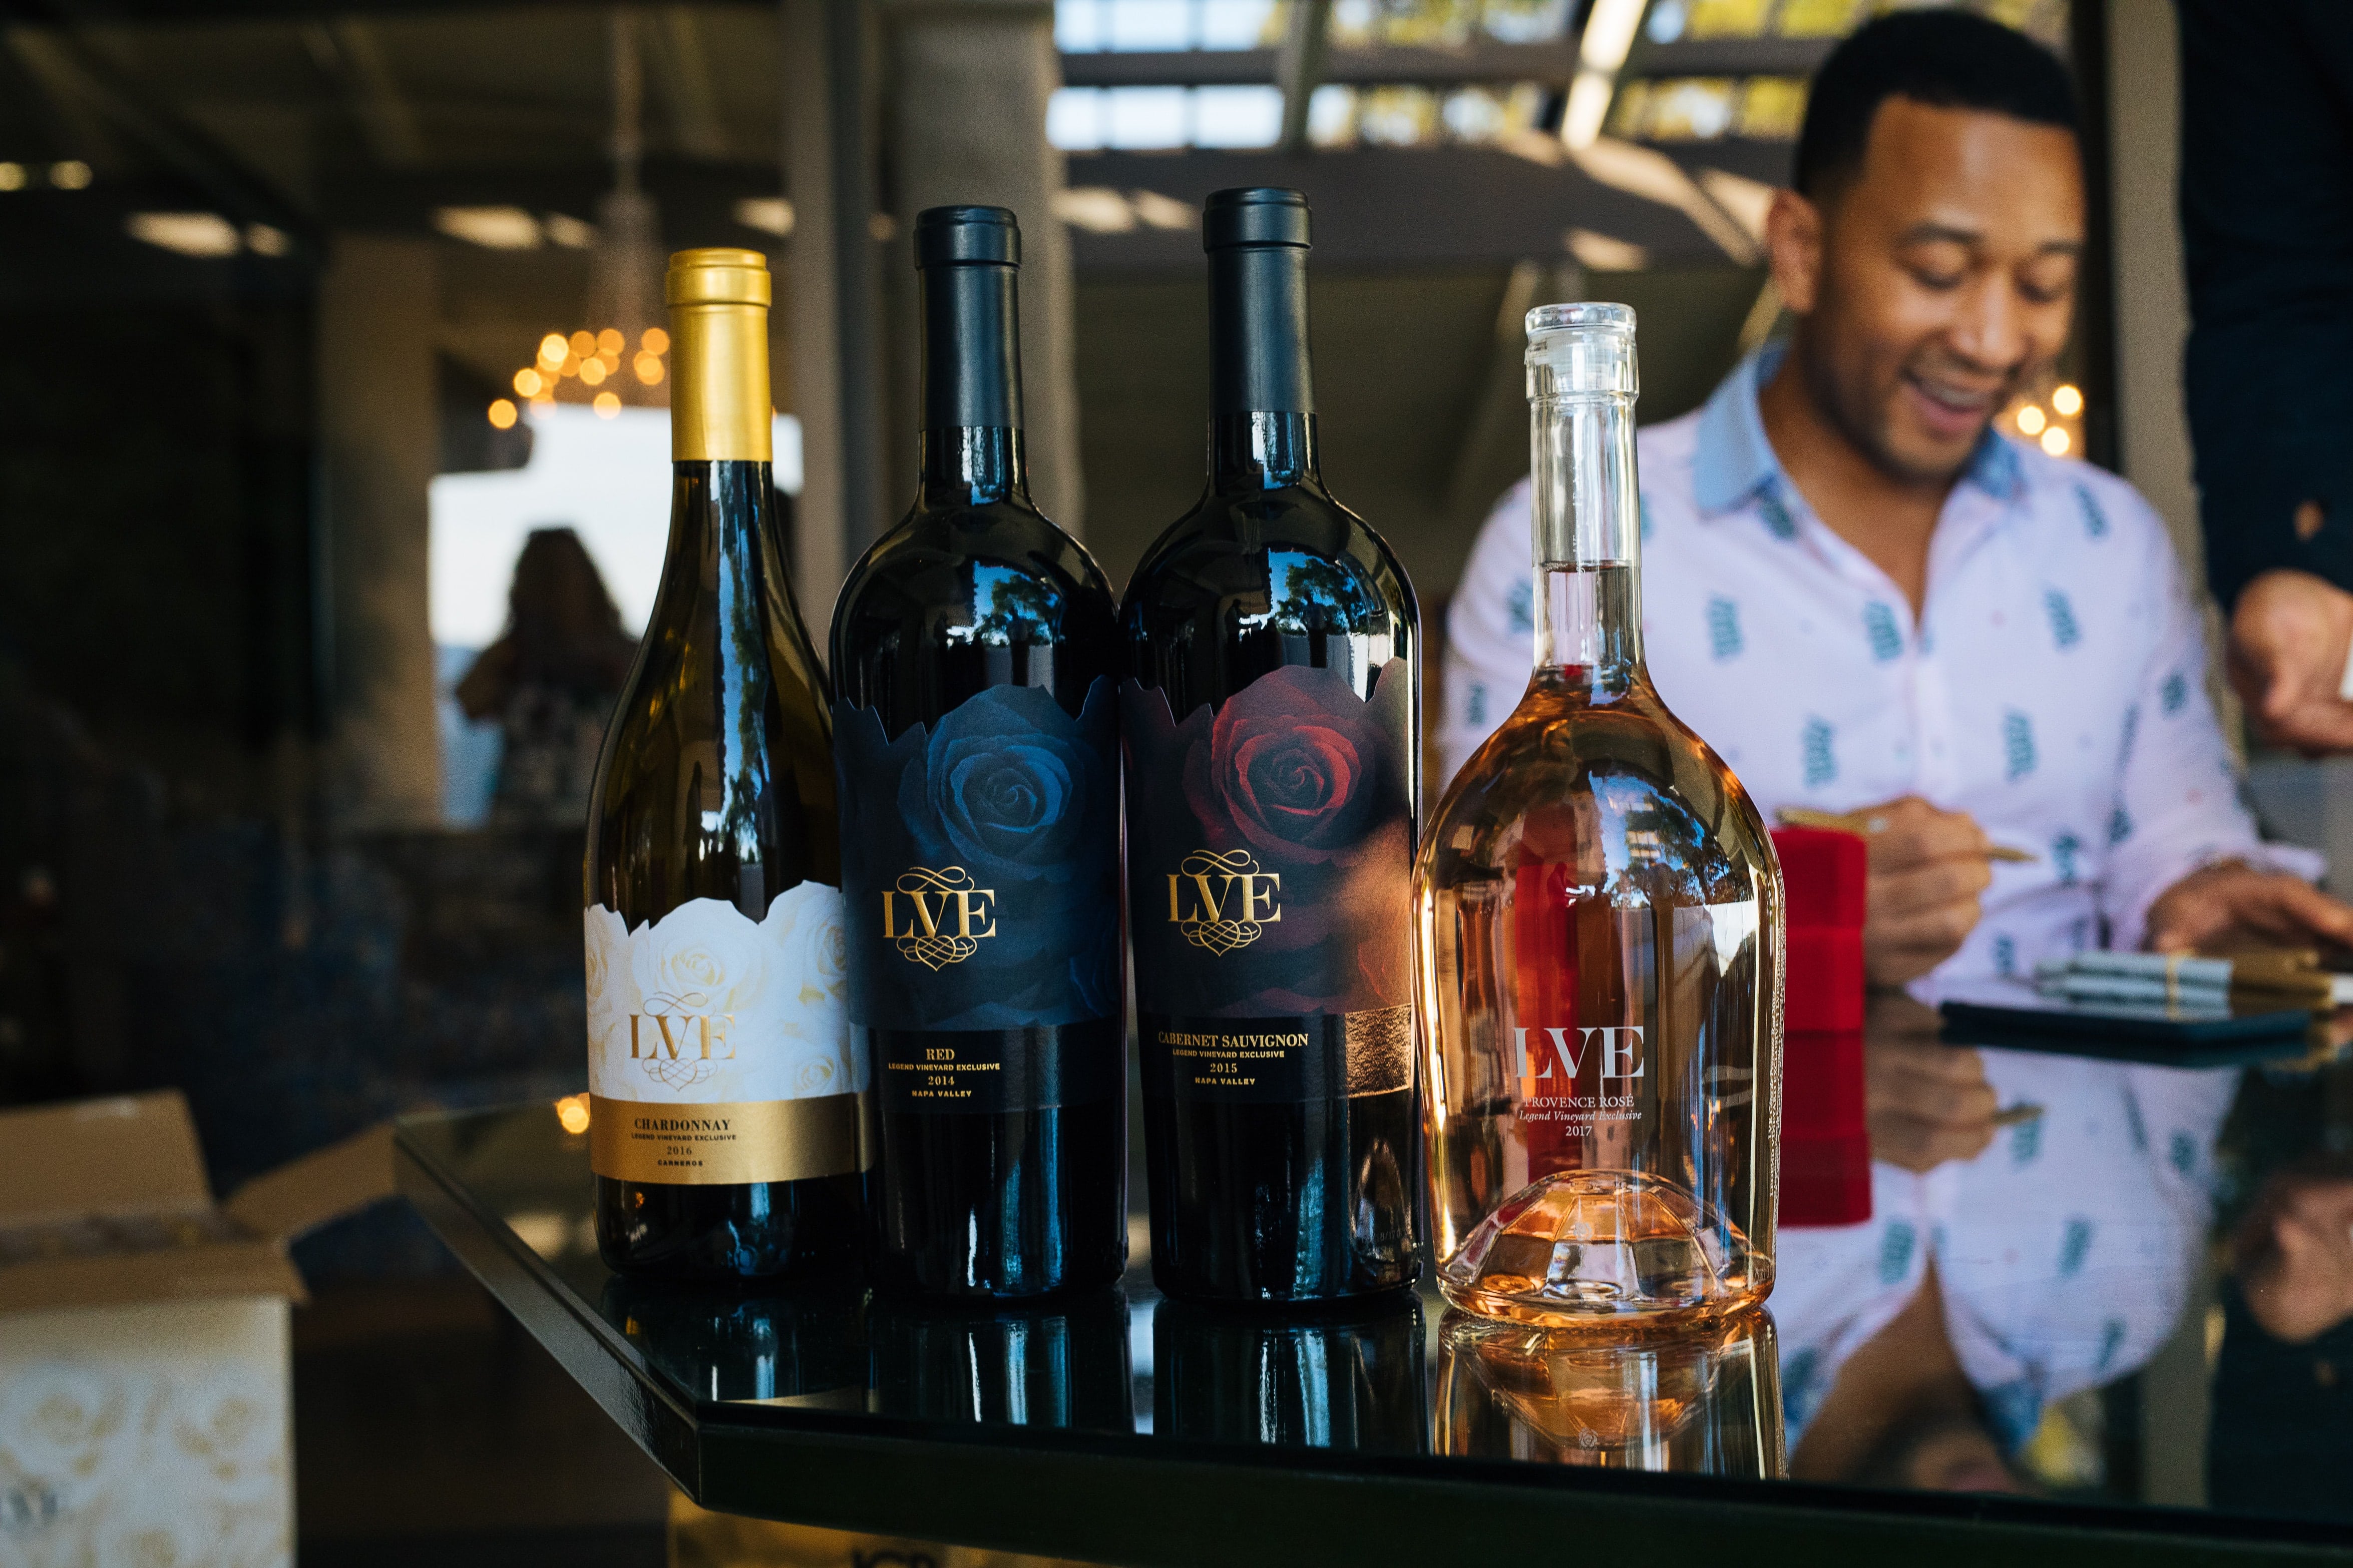 Sip Rosé This Memorial Day Weekend With John Legend and LVE Wines